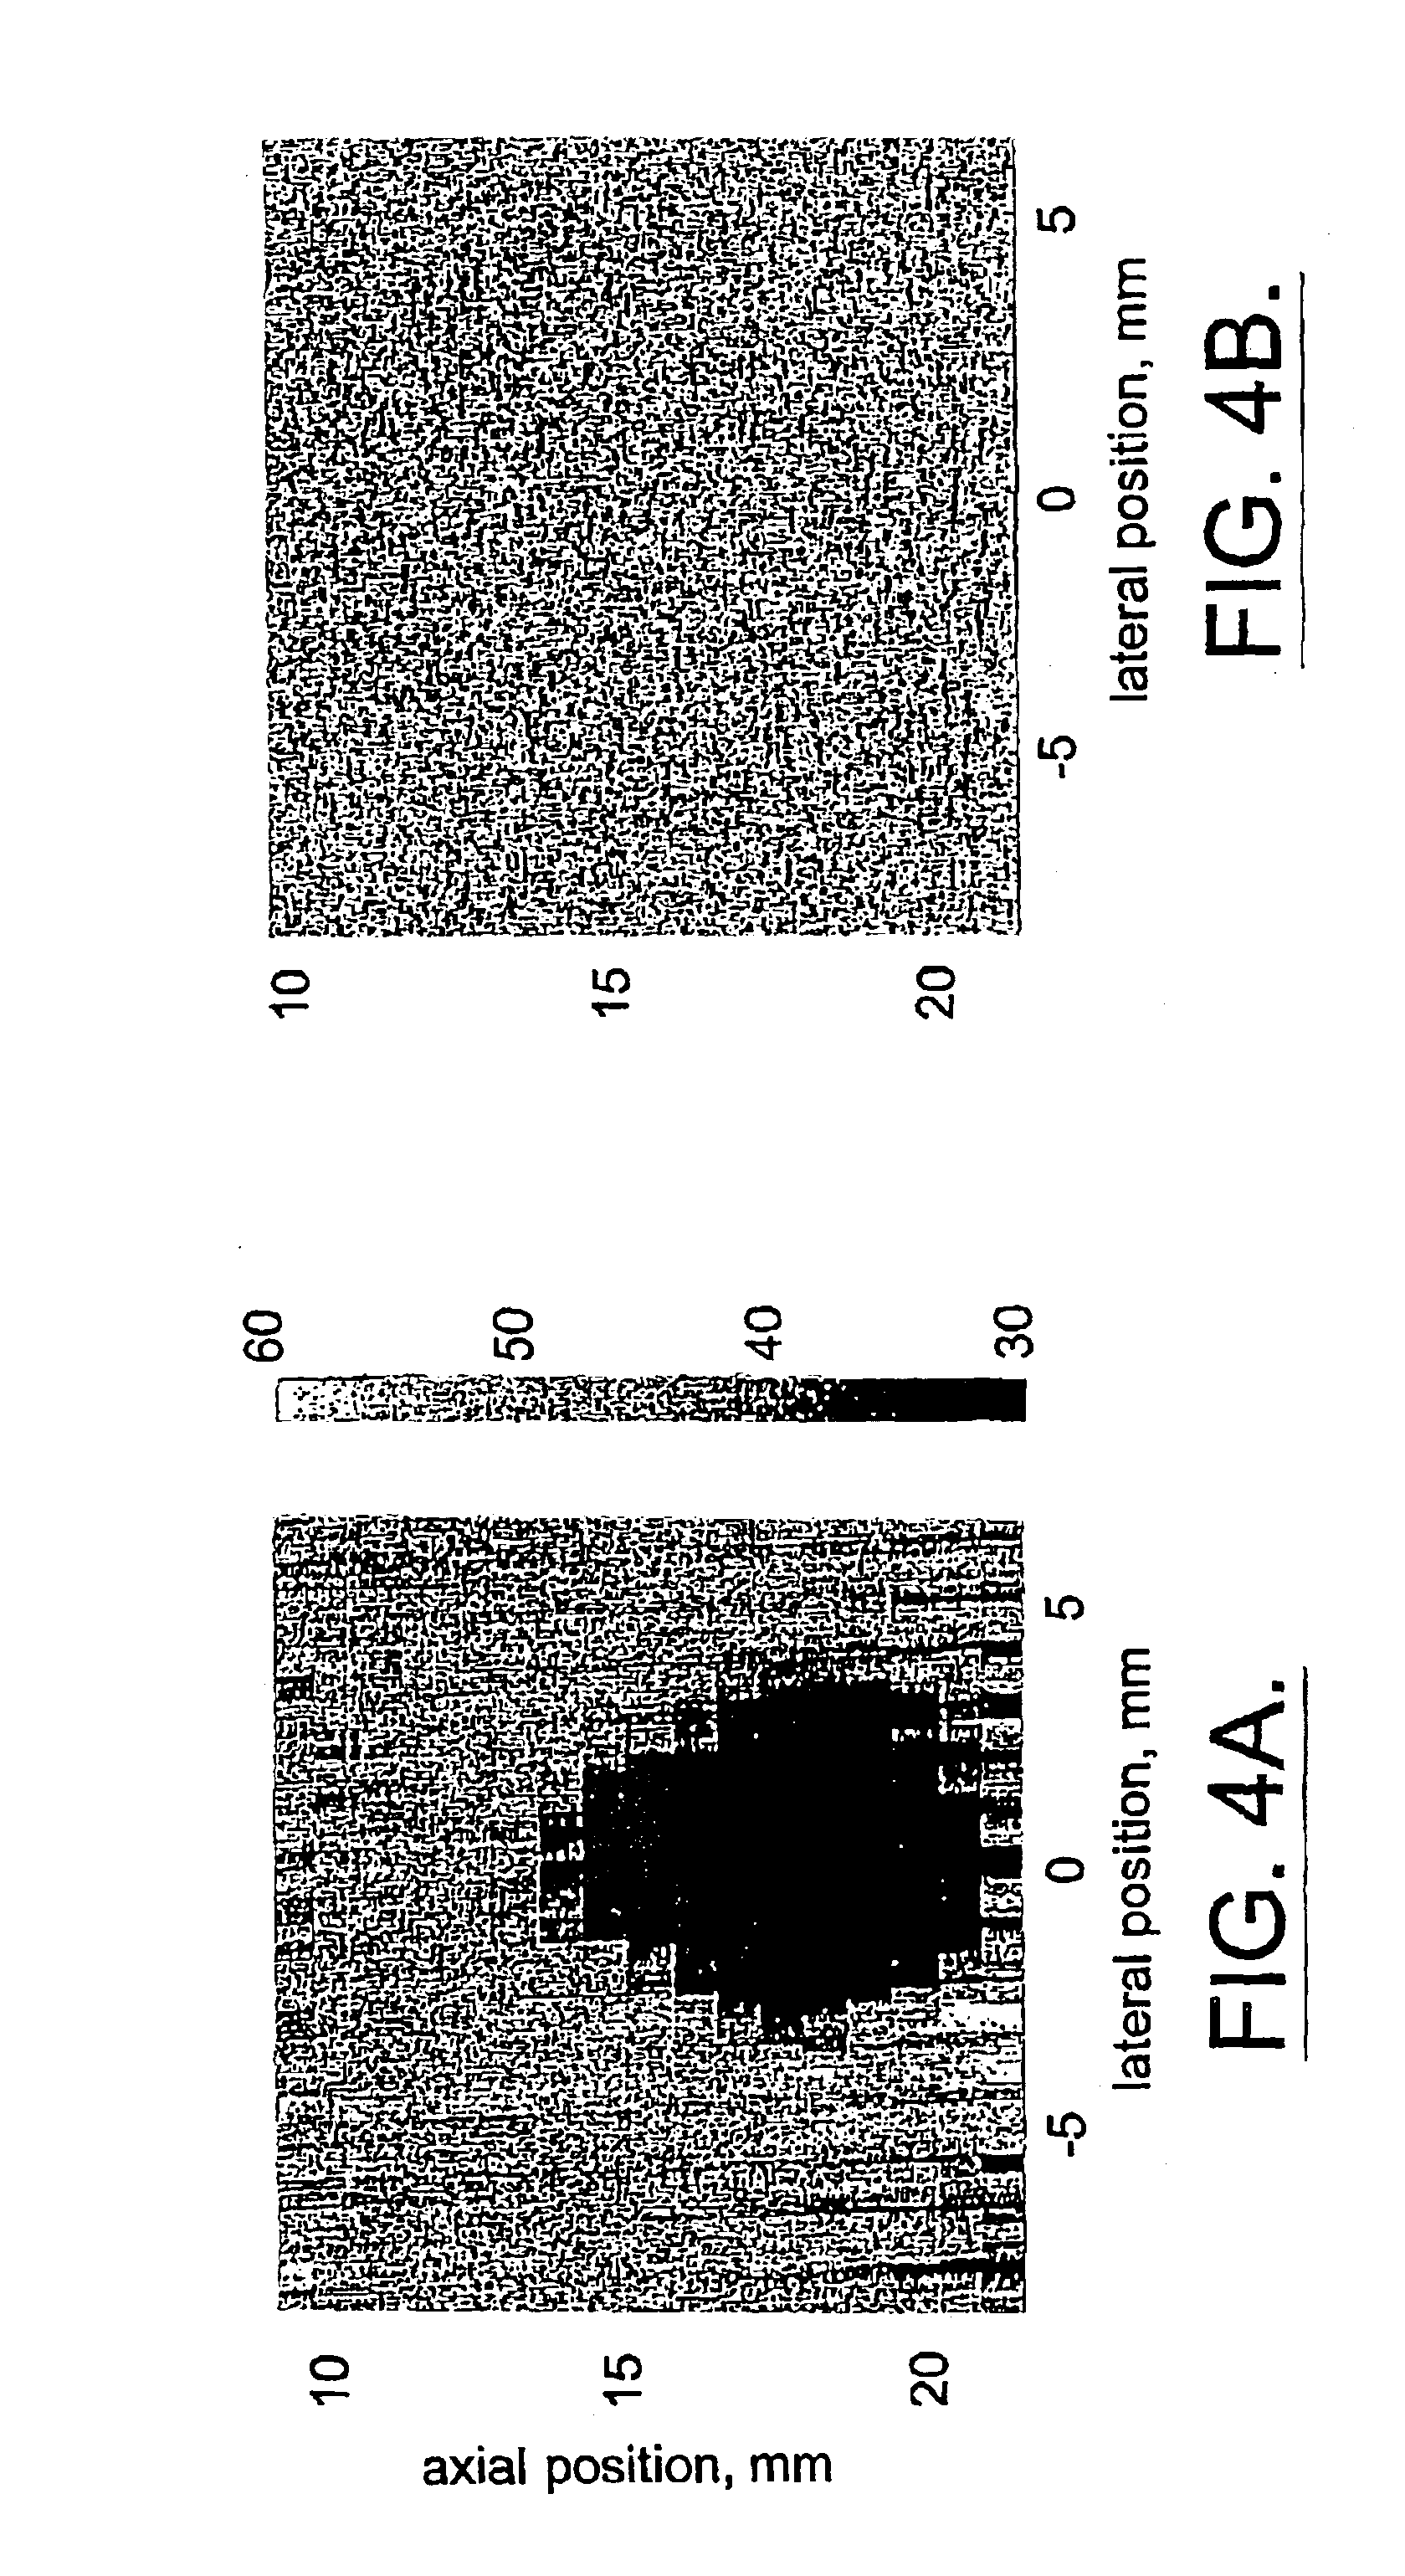 Method and apparatus for the identification and characterization of regions of altered stiffness